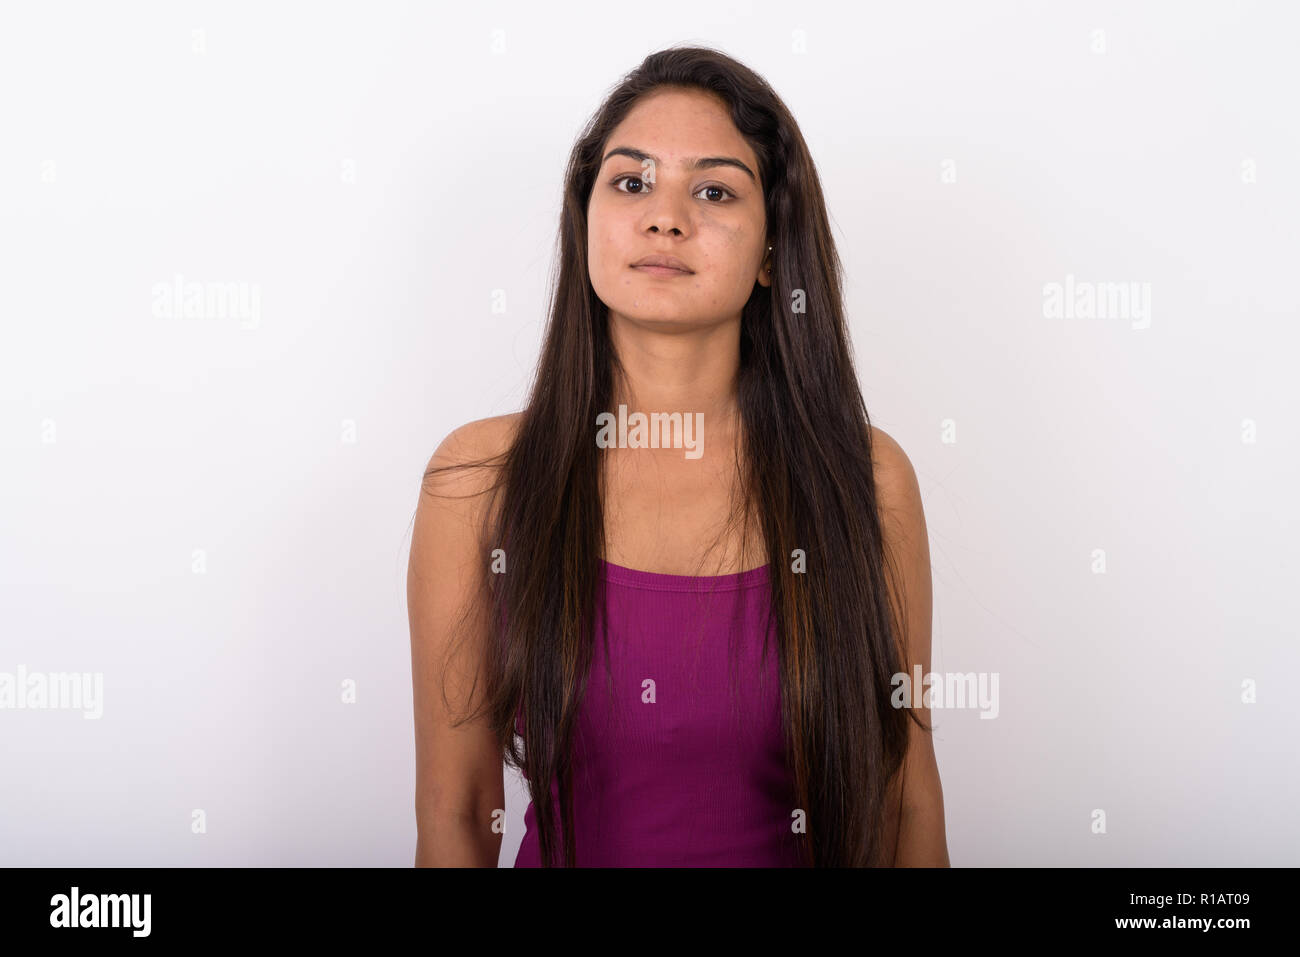 Studio shot of young woman wearing sleeveless contre whi Banque D'Images